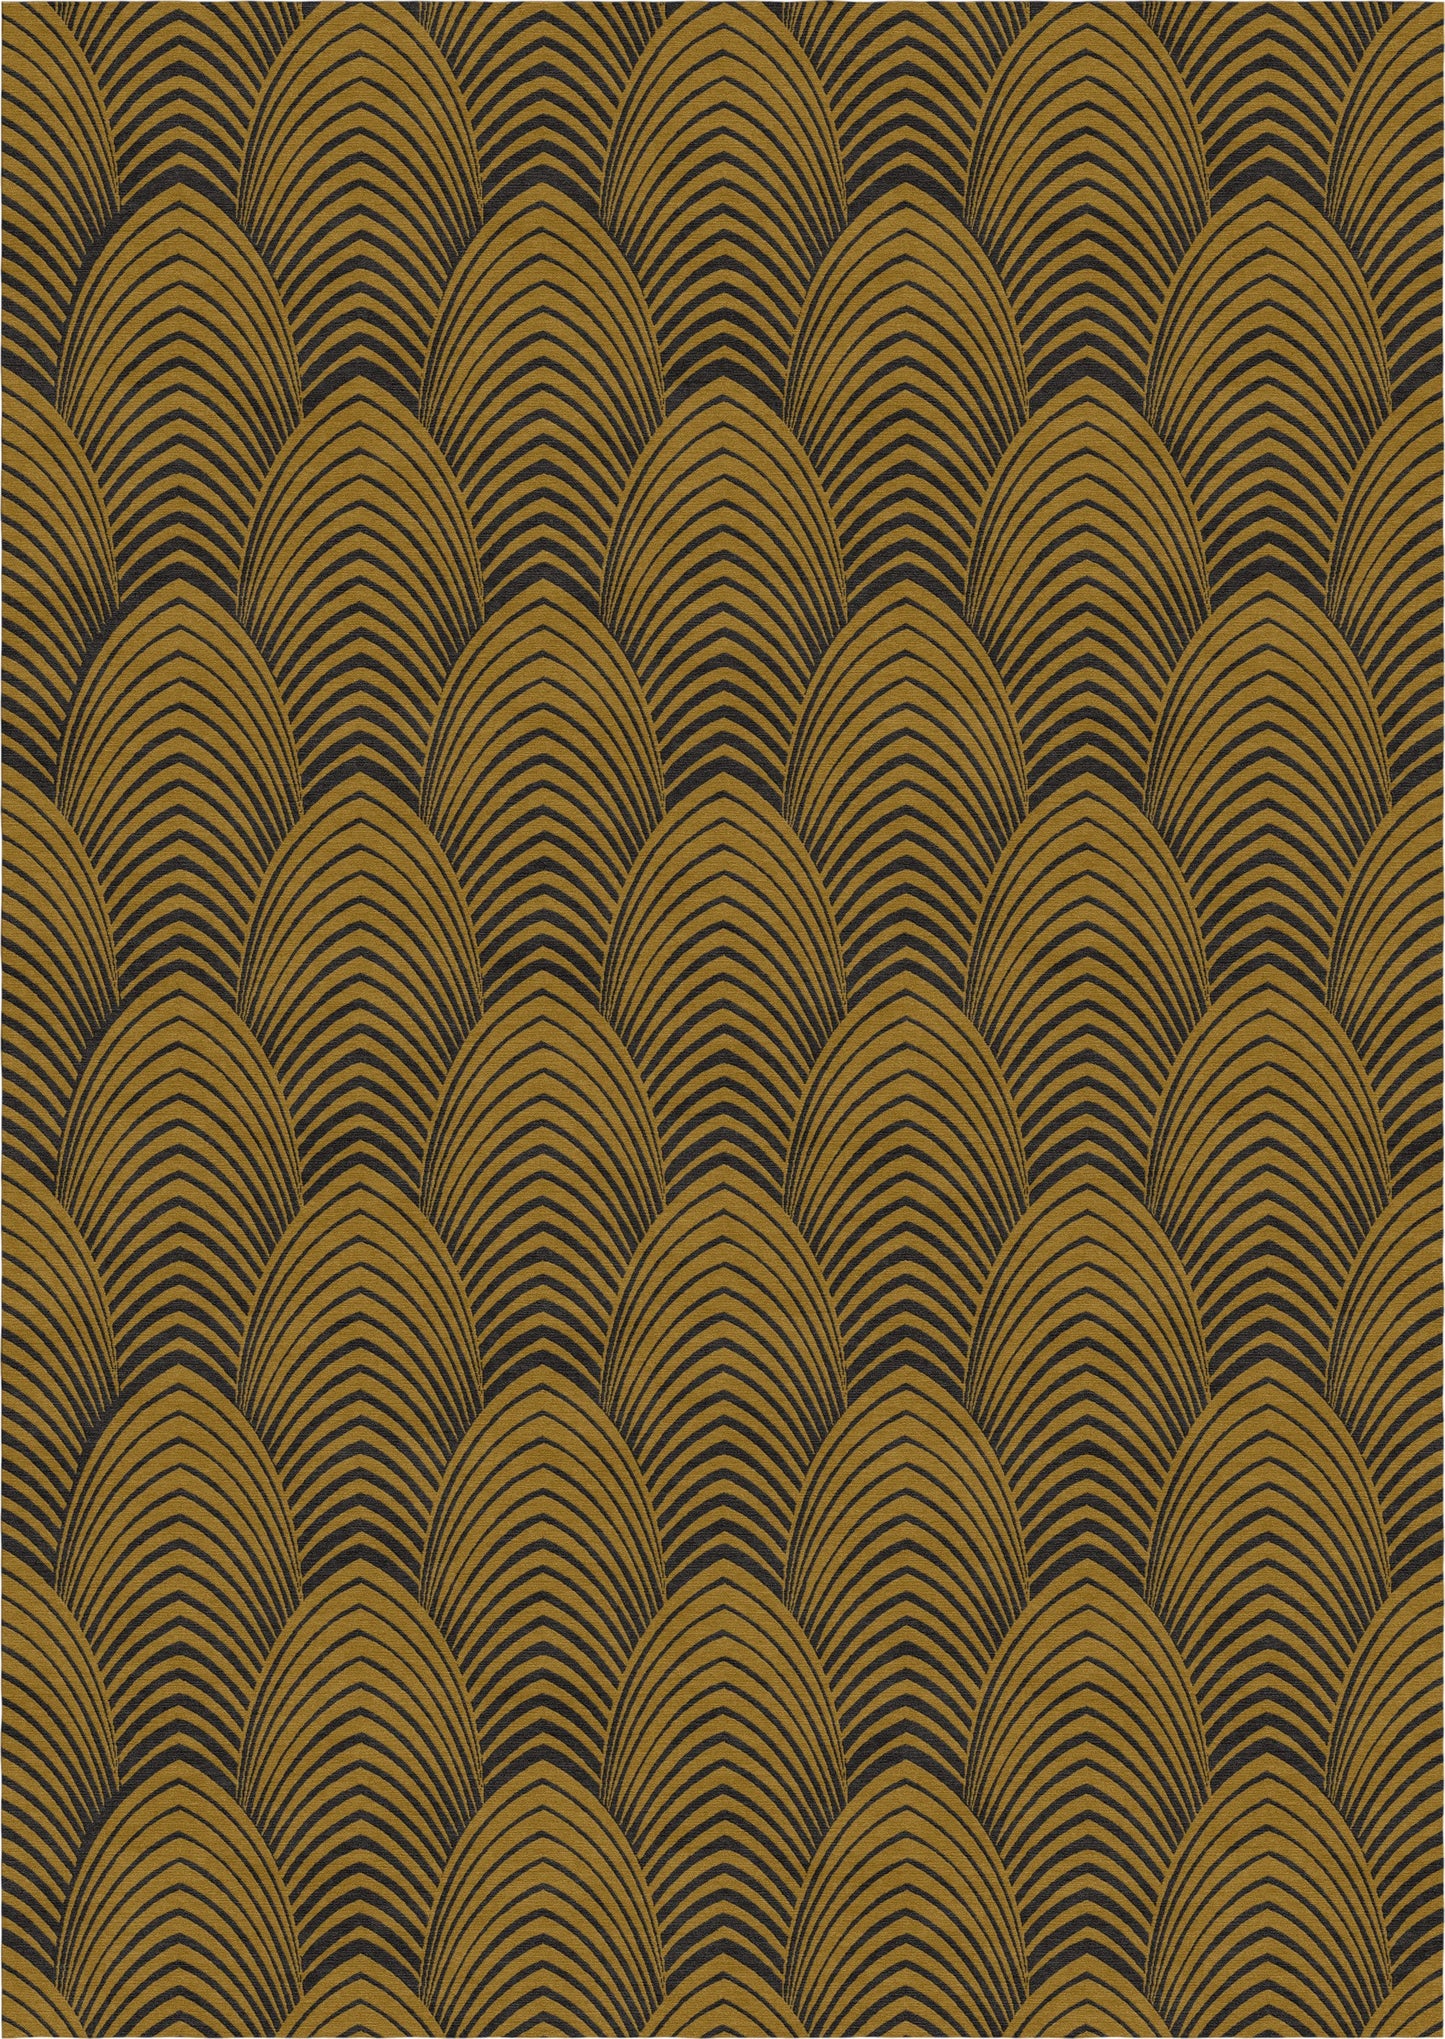 Plumage Gold - Hand Tufted Rug